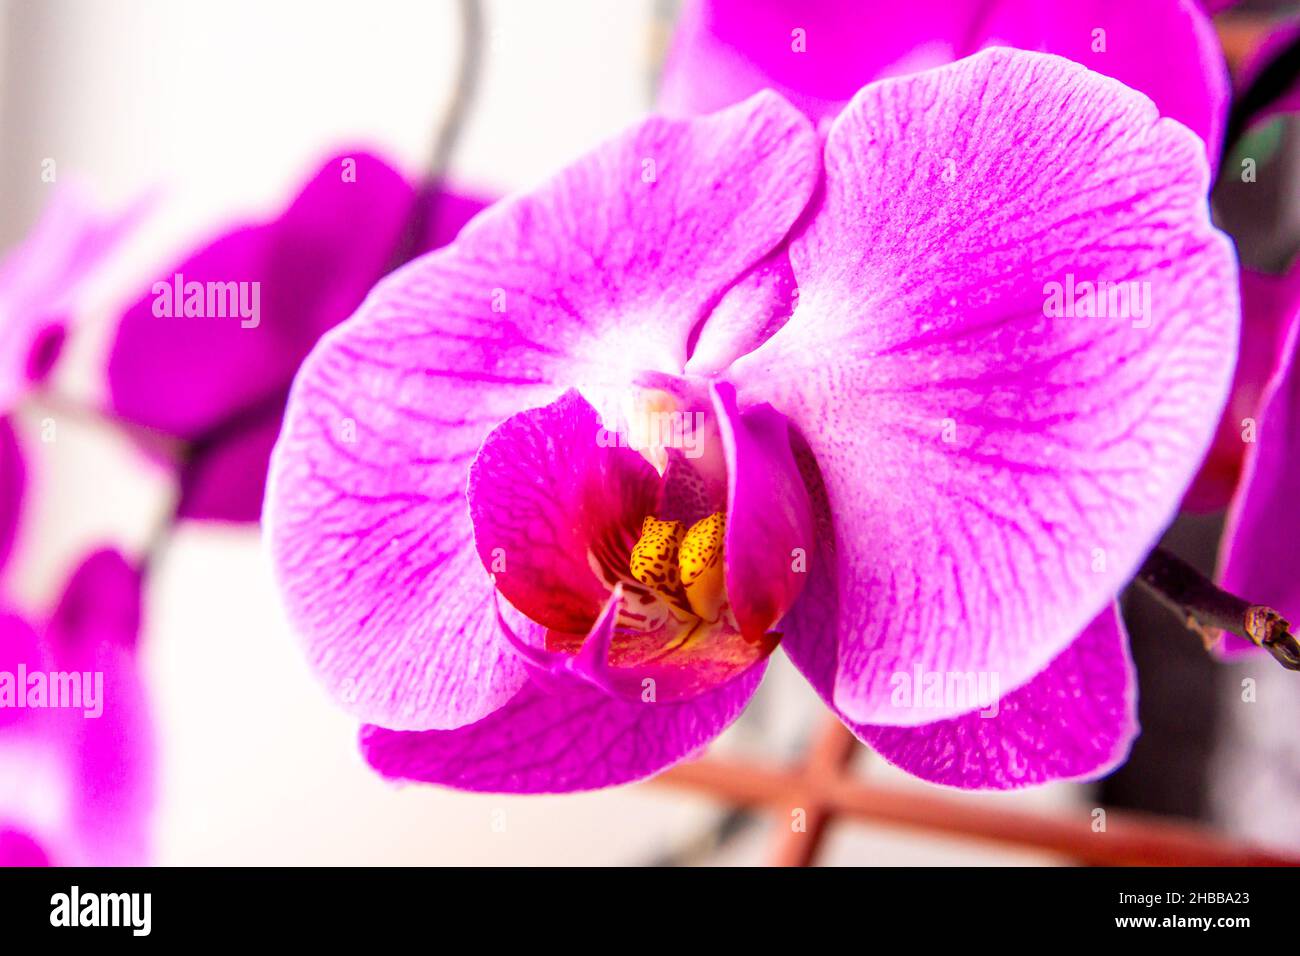 purple orchid flower with detailed texture of fiolet petals - phalaenopsis, selective focus Stock Photo